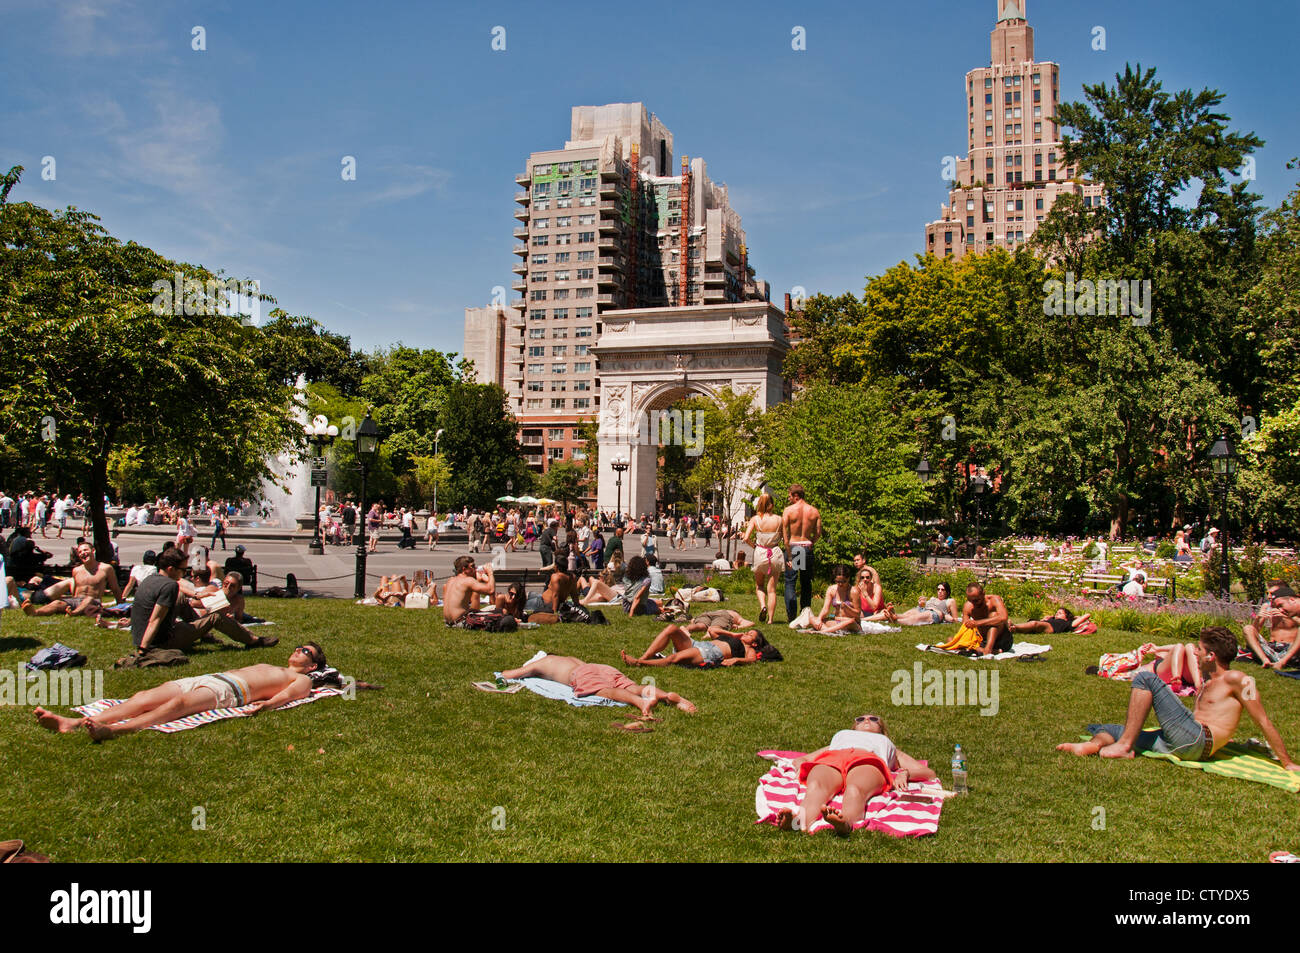 Washington Square Park West Greenwich Village ( ) Manhattan New York United States of America Banque D'Images